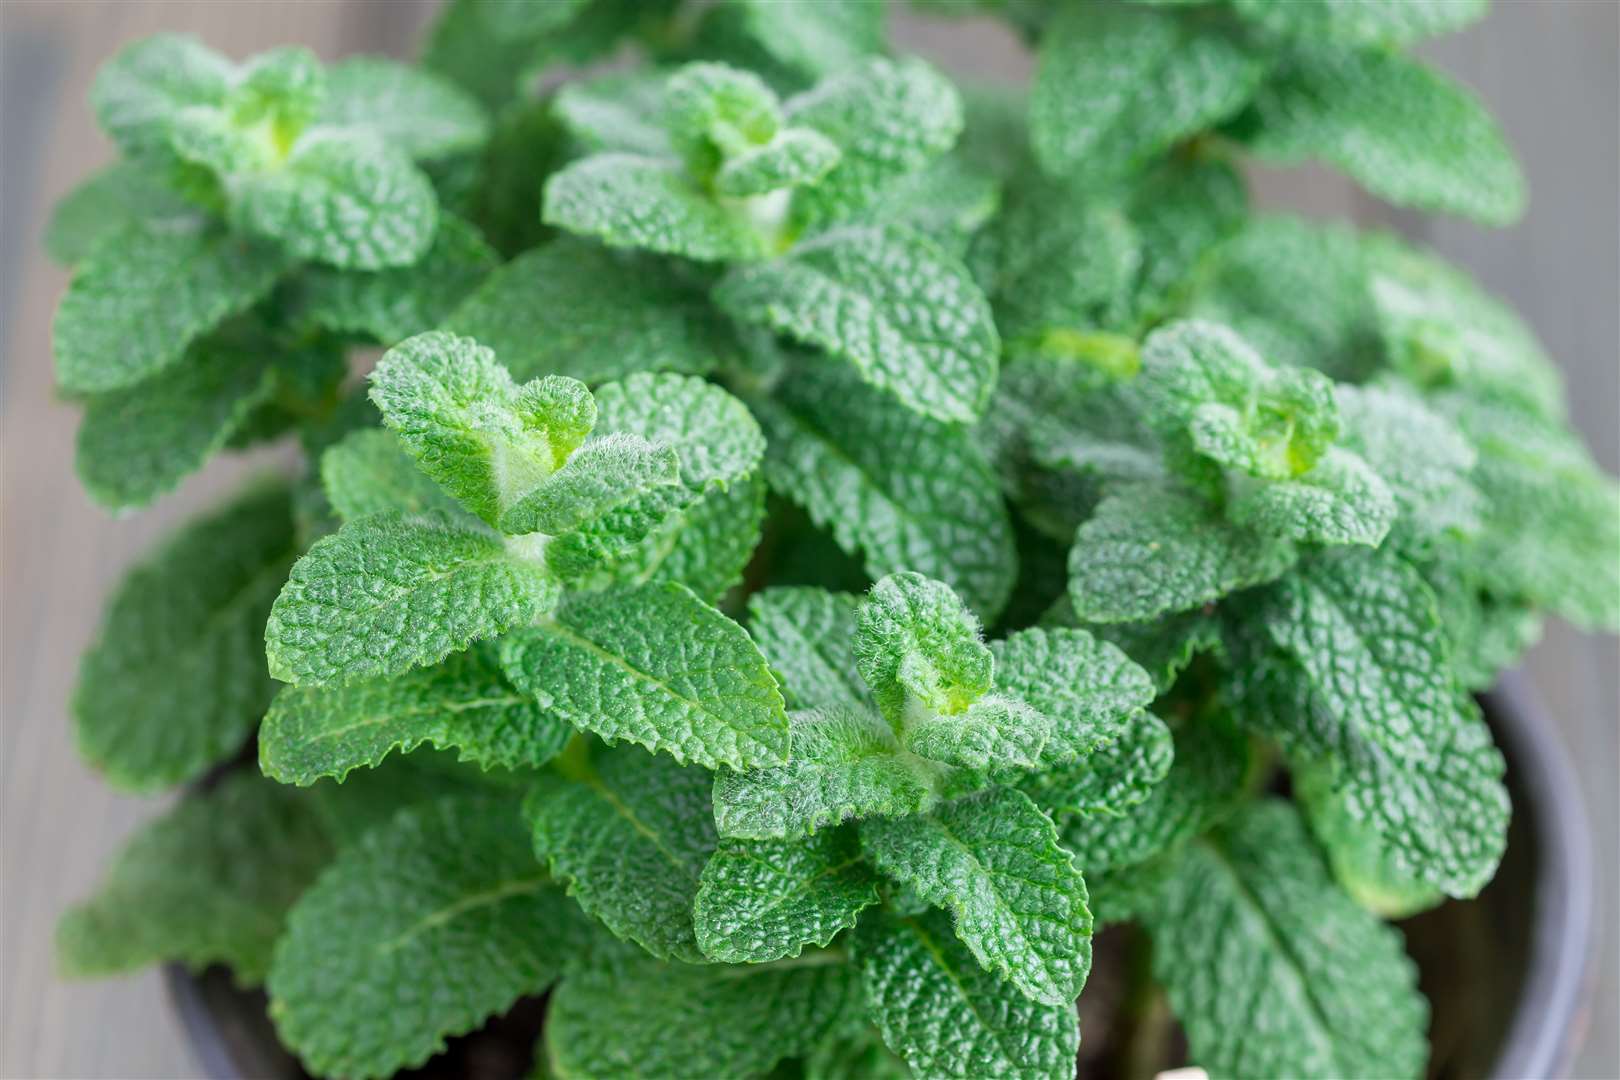 Apple mint is good for attracting bees and other pollinators.